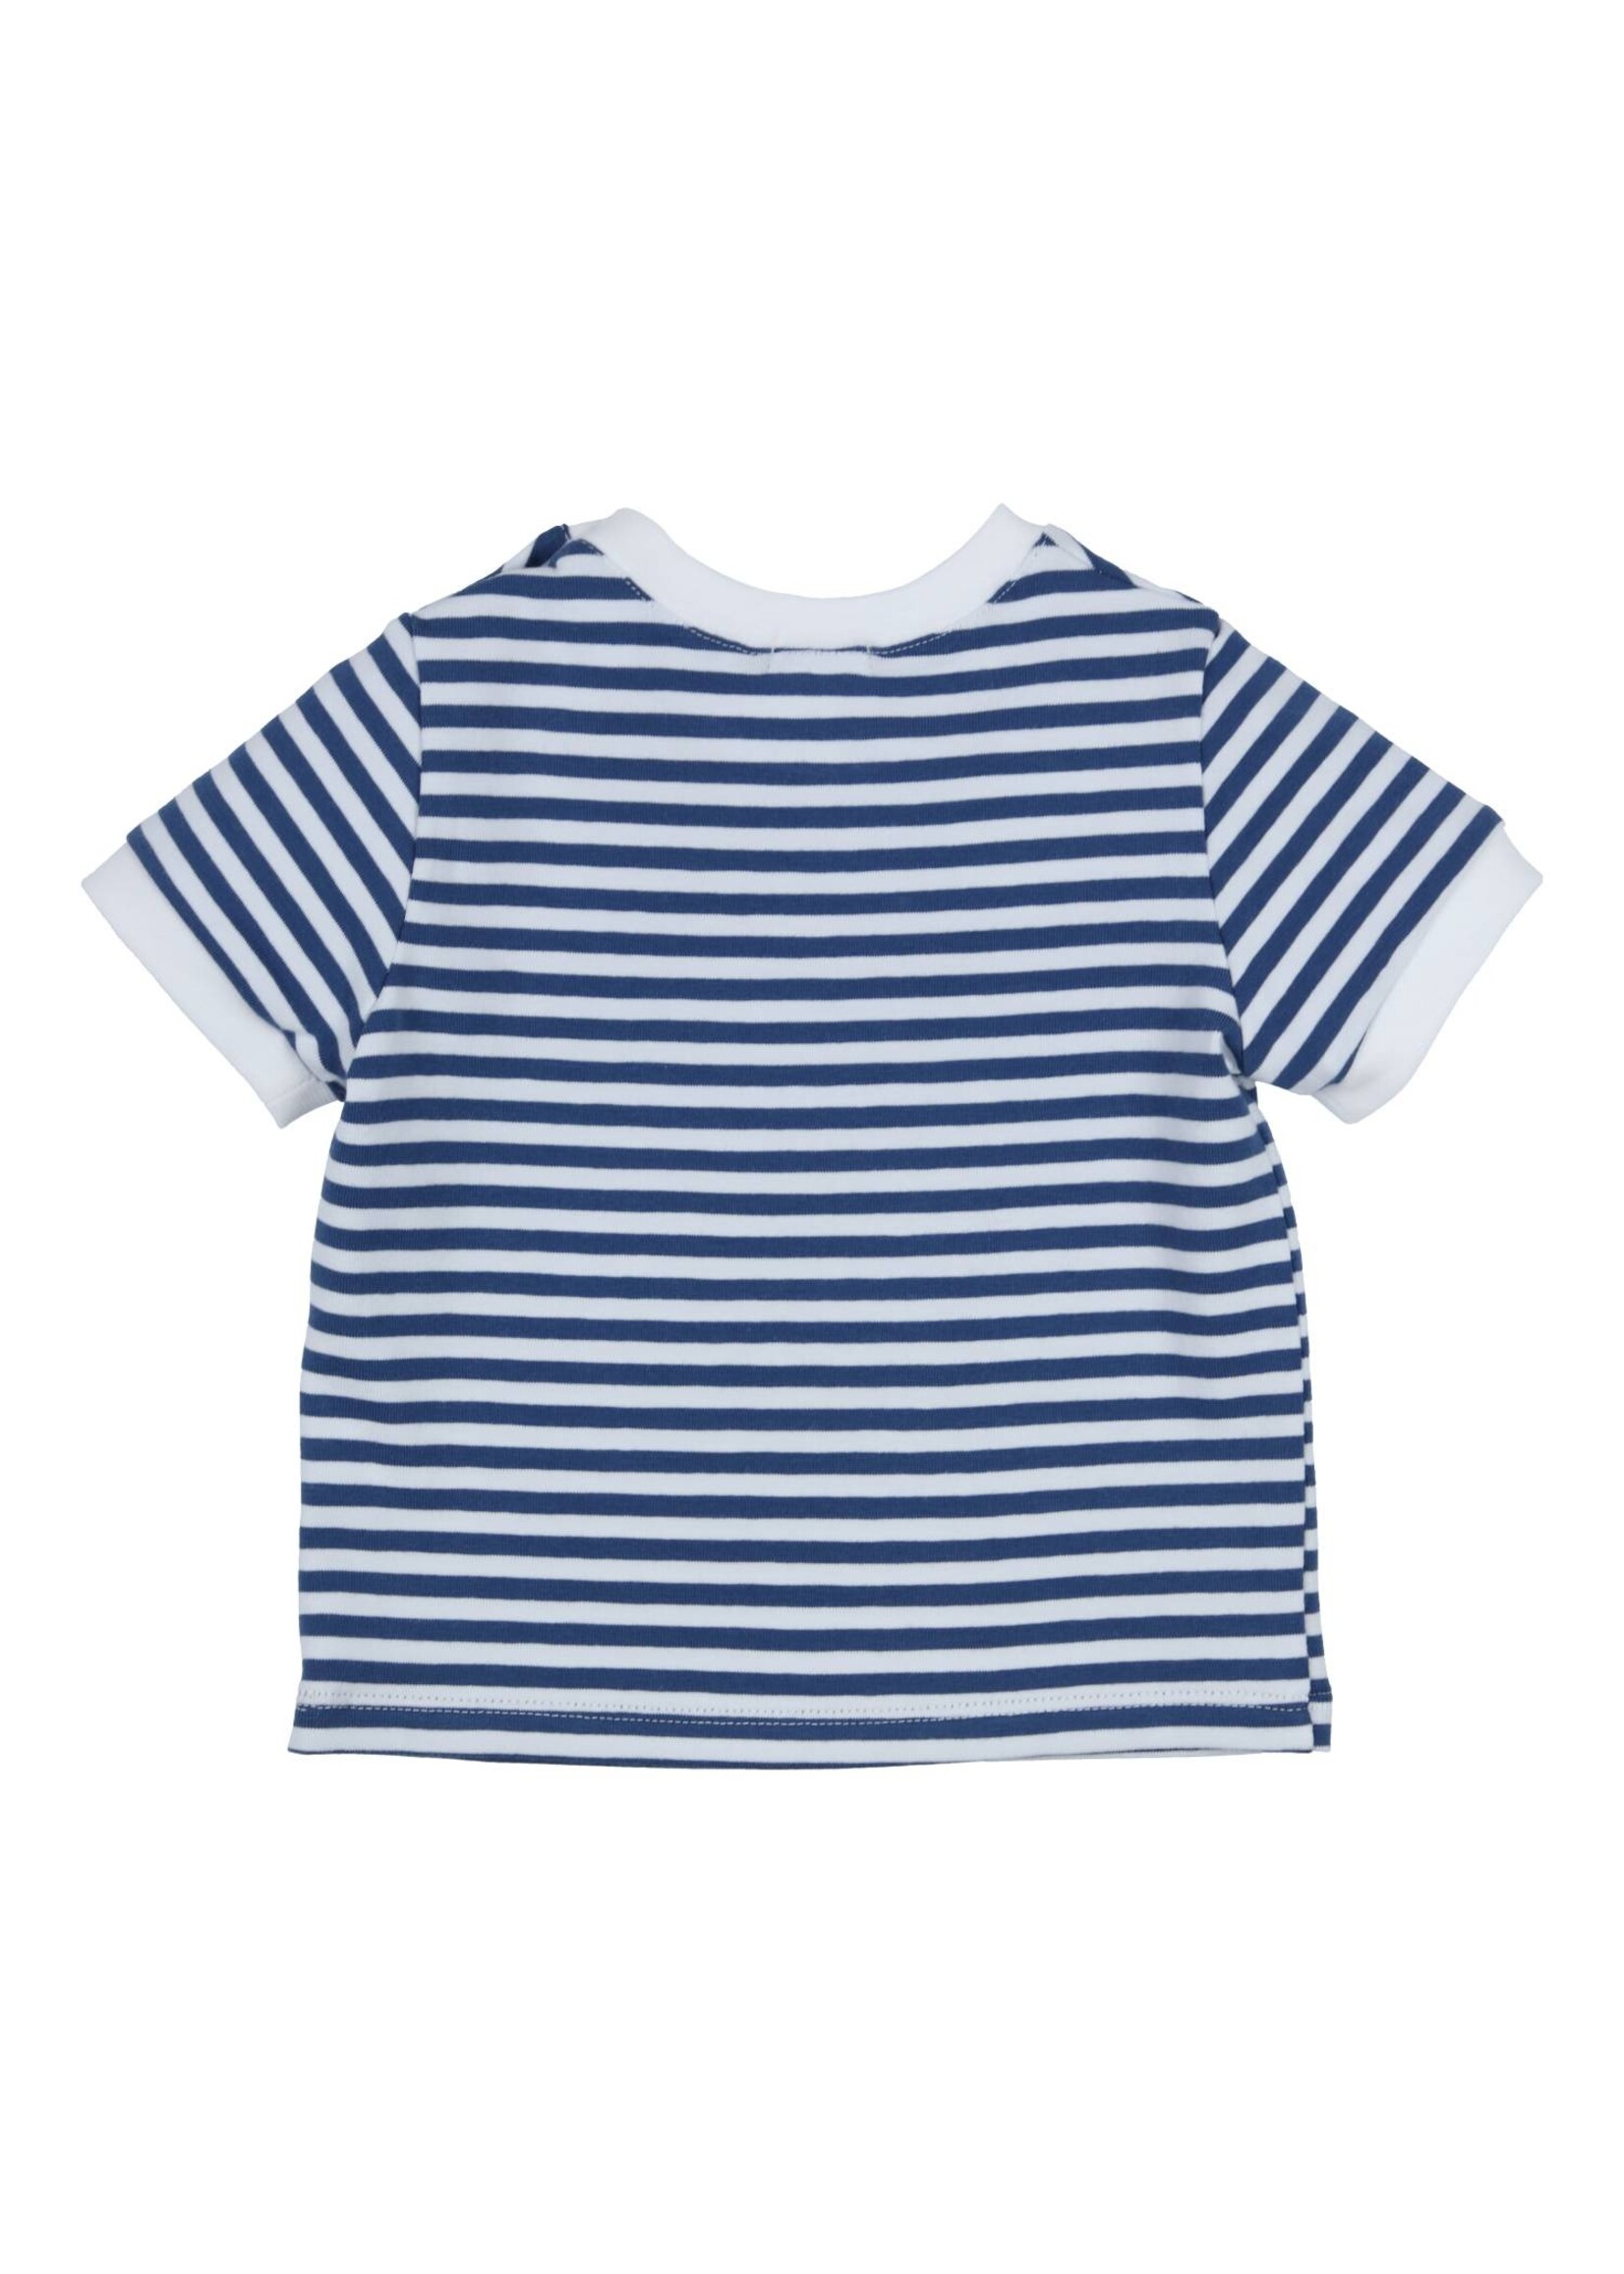 Gymp Boys T-shirt Pedro Yay all Day 353-4286-20 Blue - White